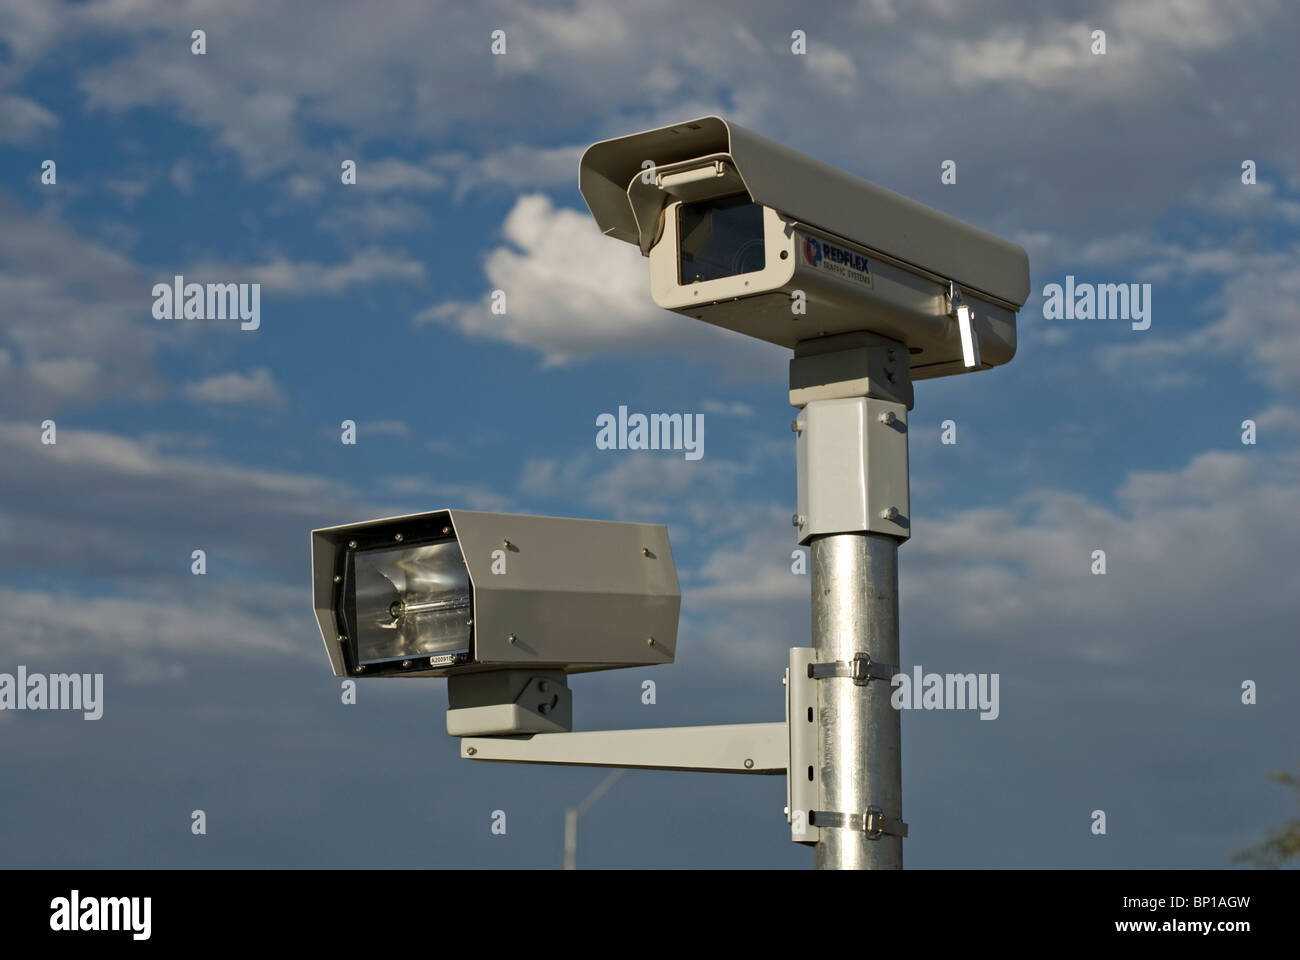 Redflex speed cameras at an intersection in Arizona, USA Stock Photo